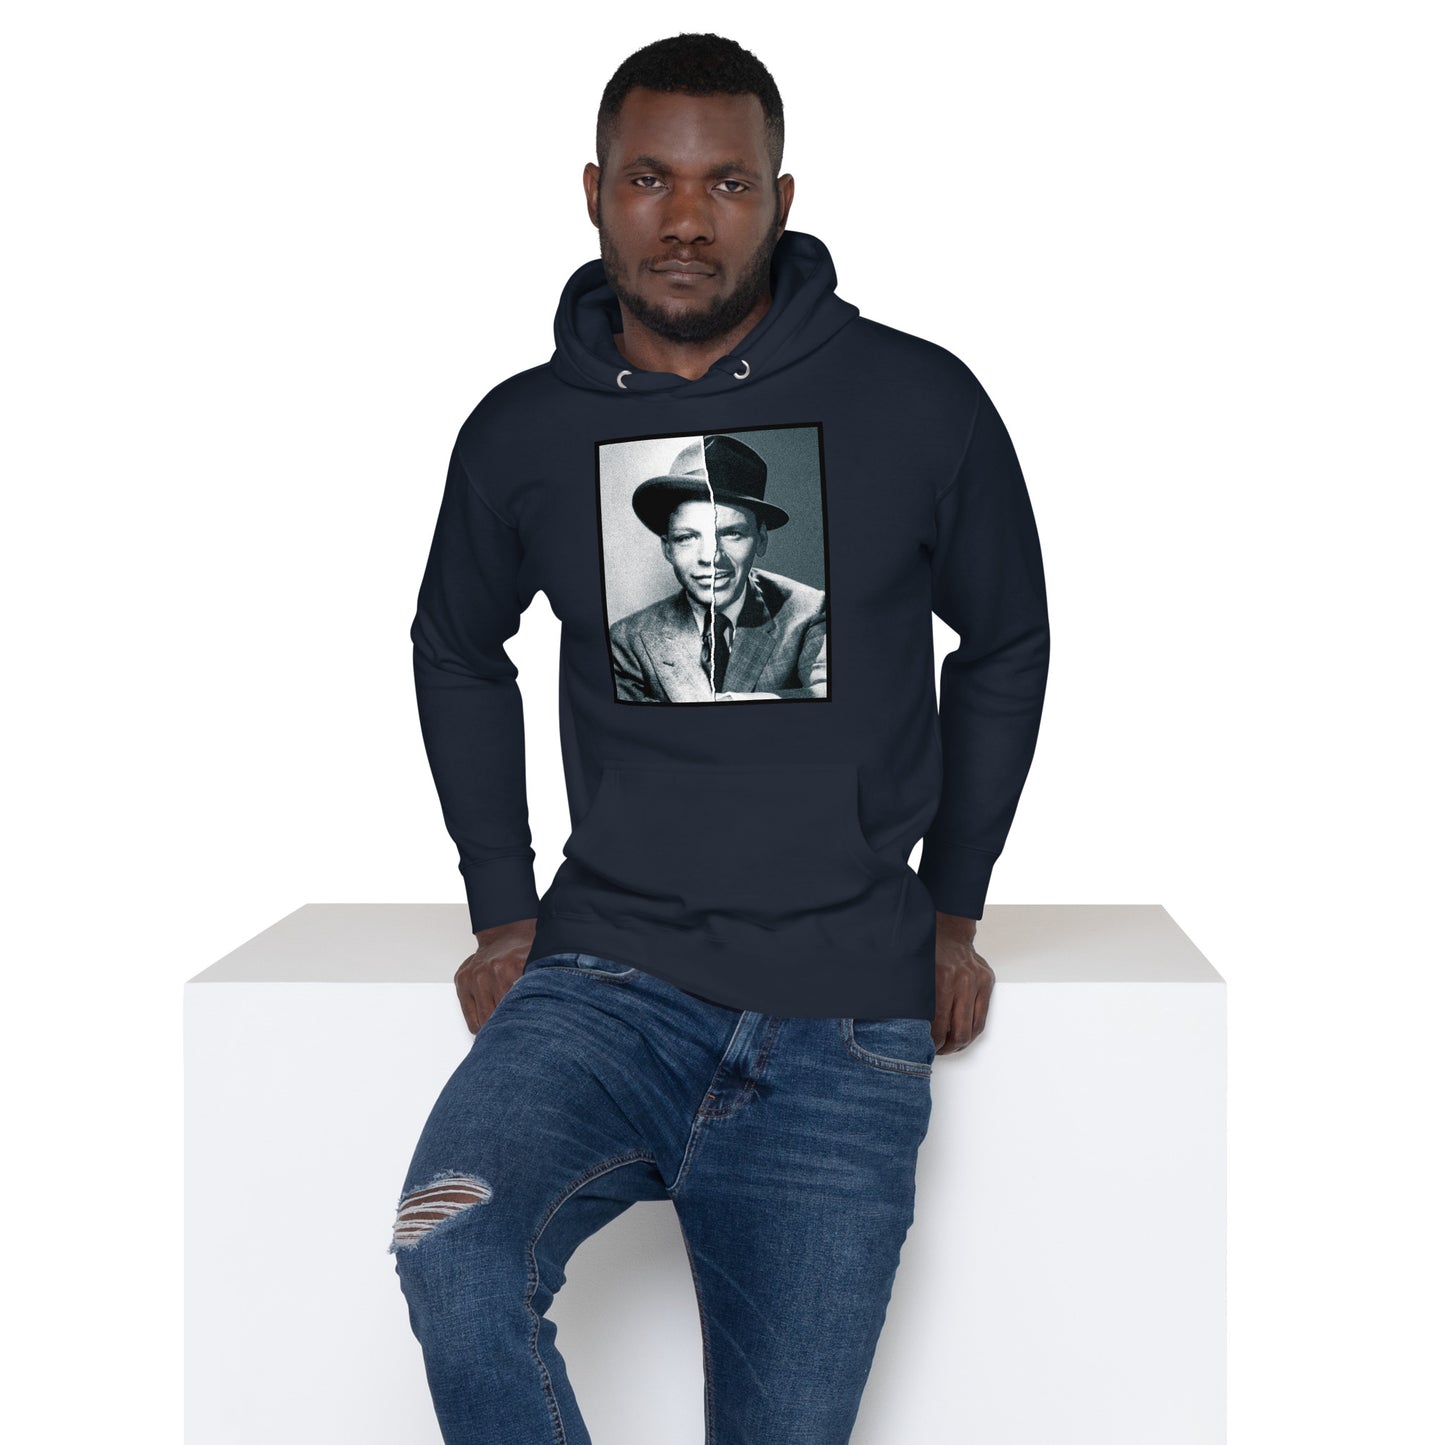 Sinatra KiSS Unisex Hoodie - Frank Rat Pack young and old Hollywood